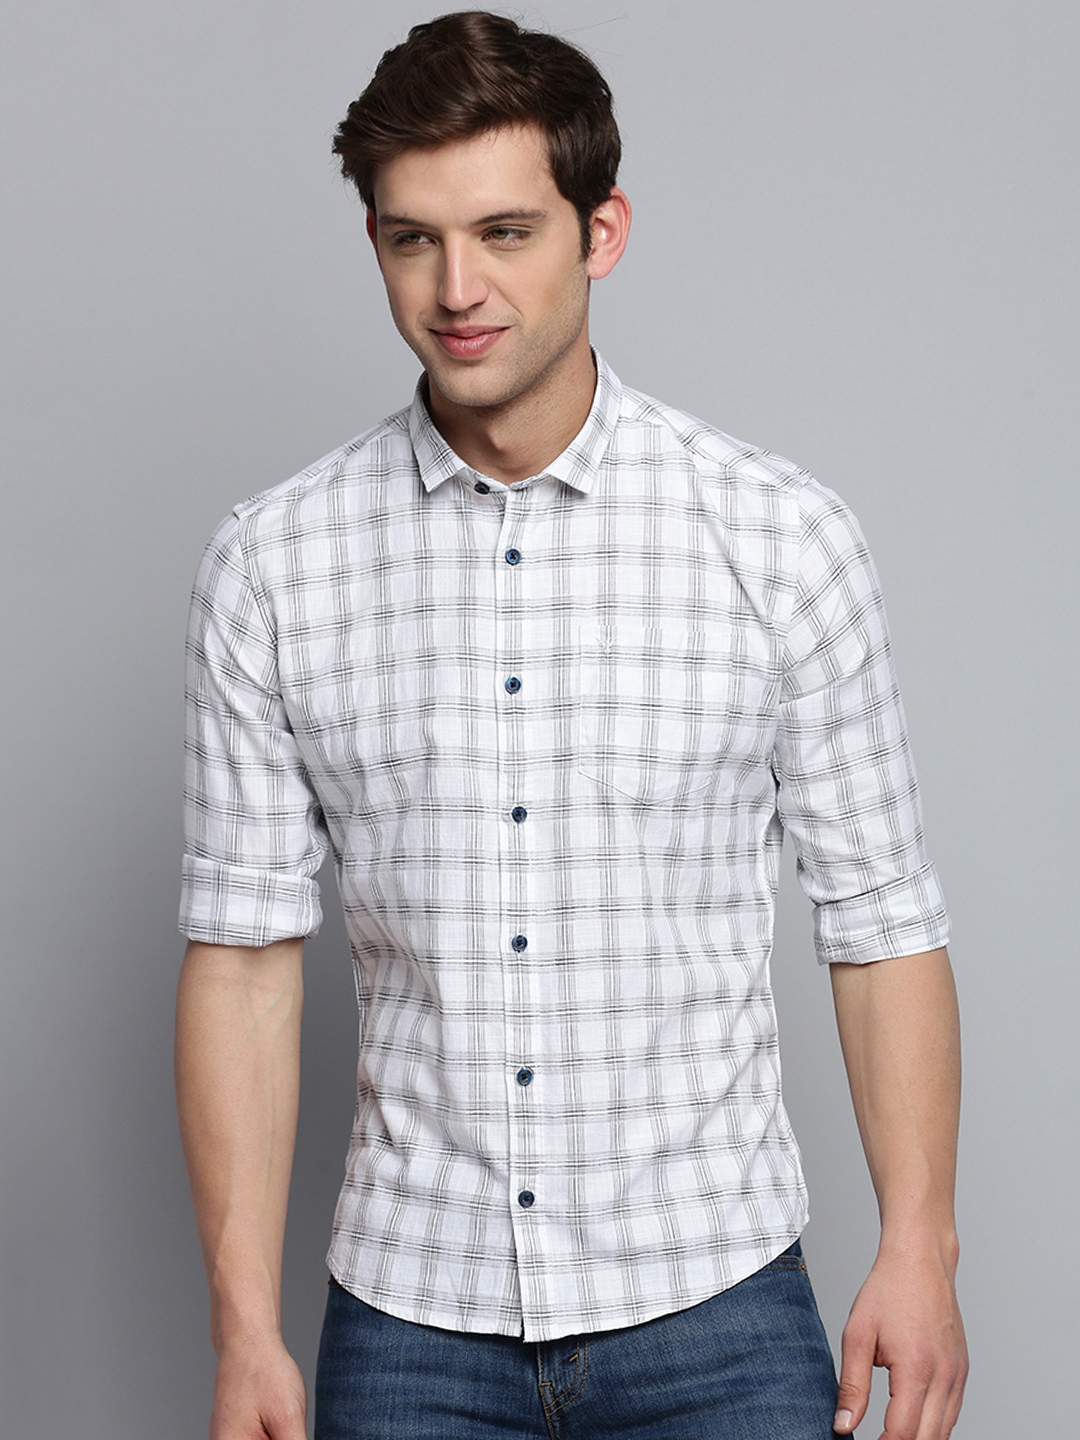 Showoff | SHOWOFF Men's Spread Collar Checked White Classic Shirt 1